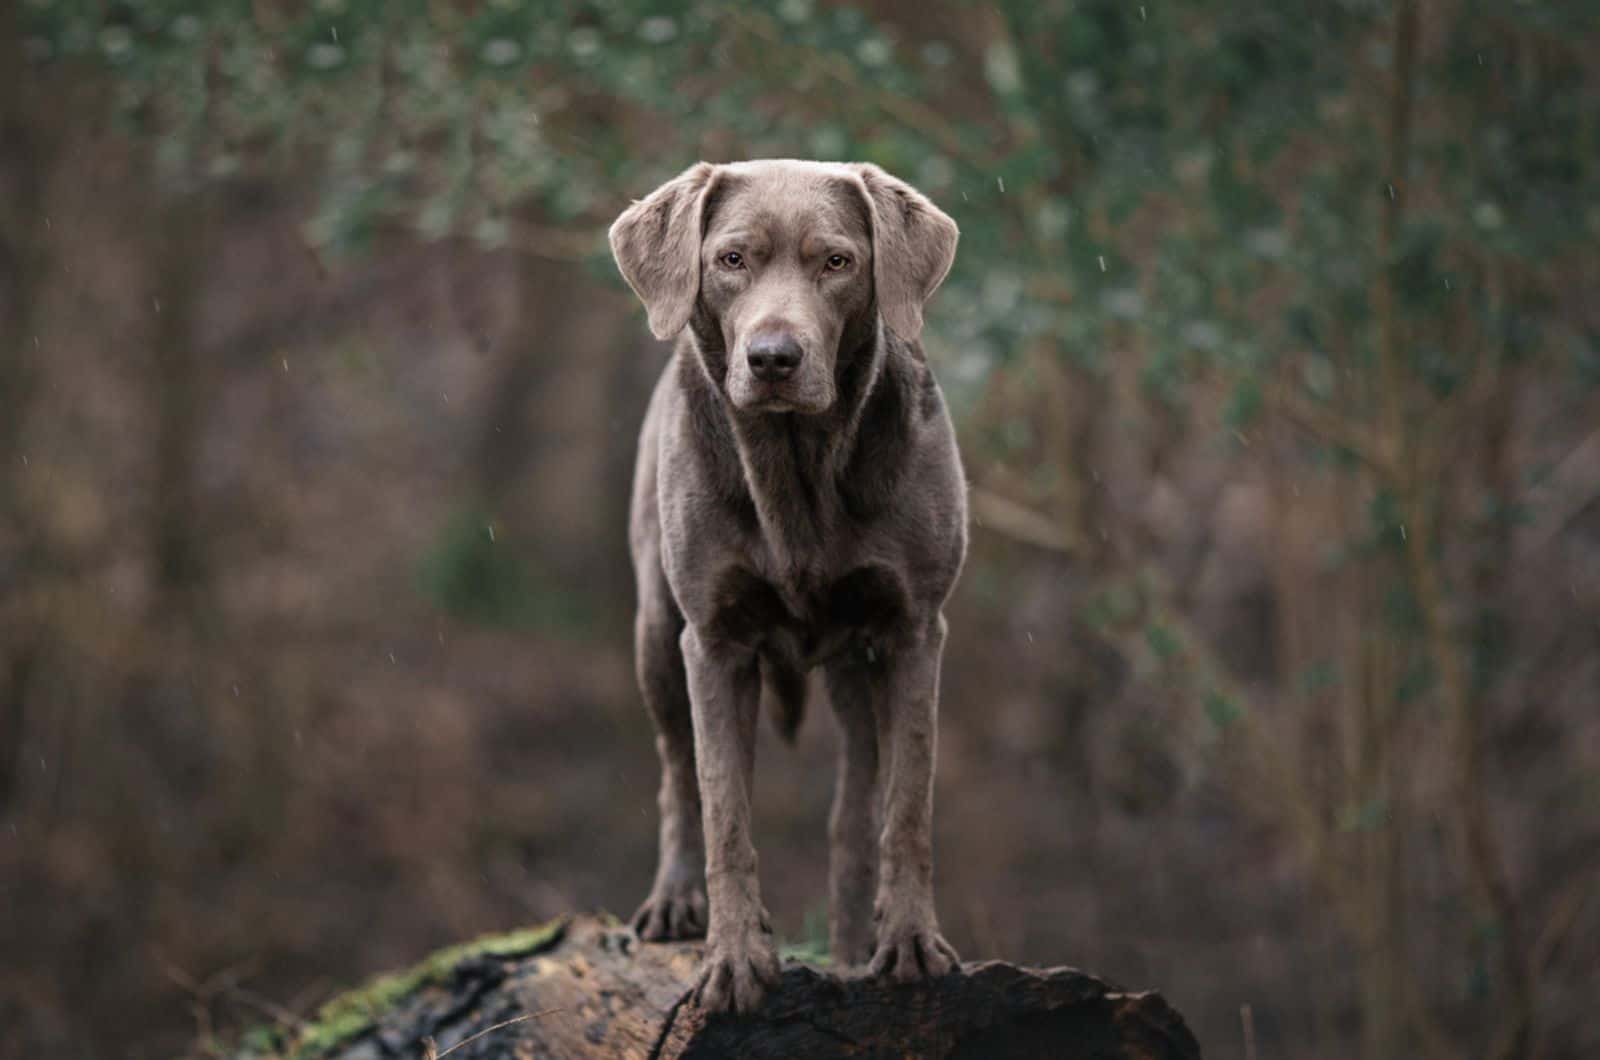 Silver Labradors: Our New Favorite Lab Color